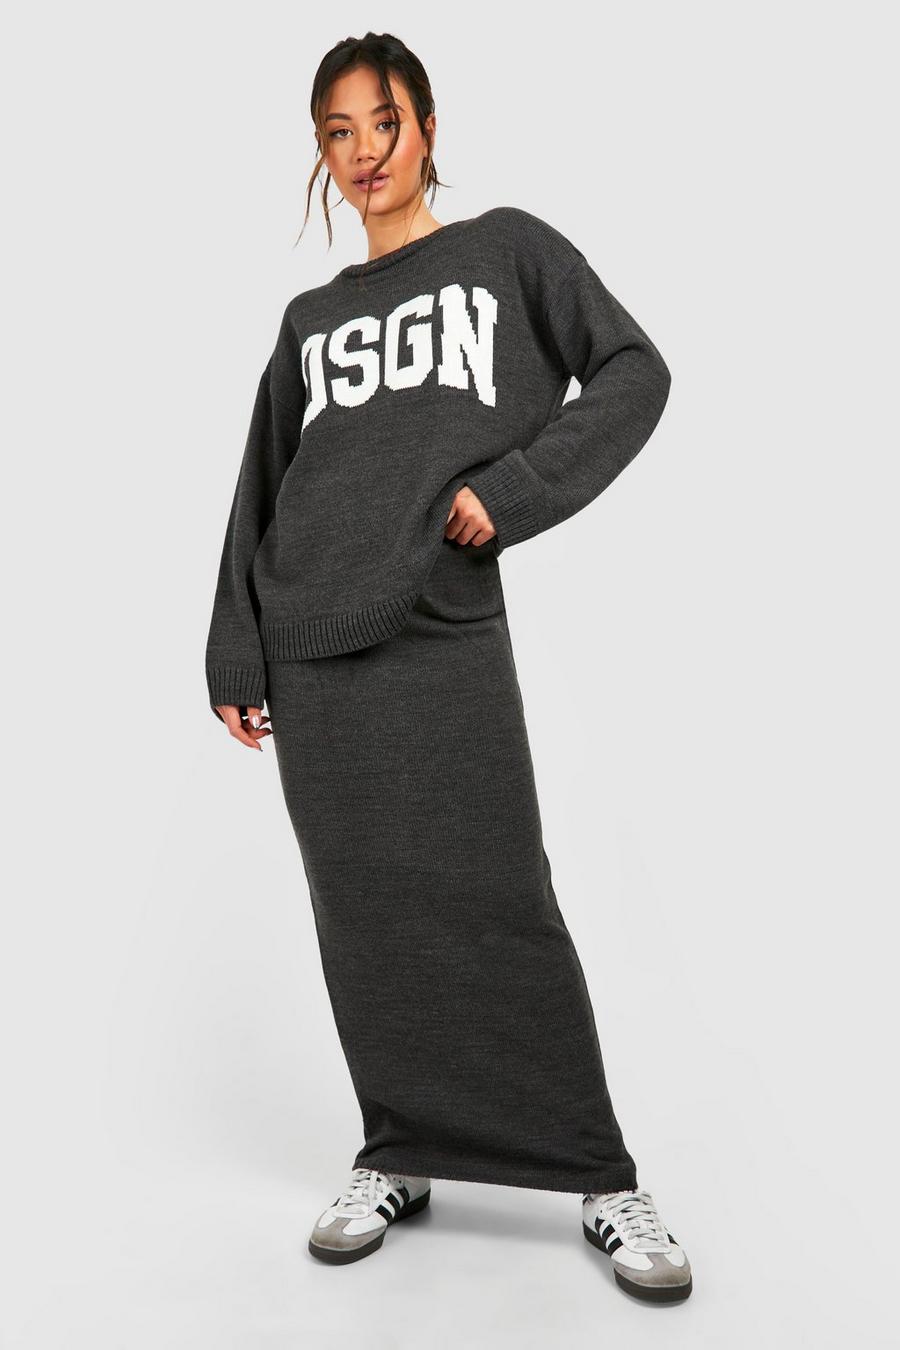 Charcoal grey Dsgn Crew Neck Knitted Jumper And Maxi Skirt Set